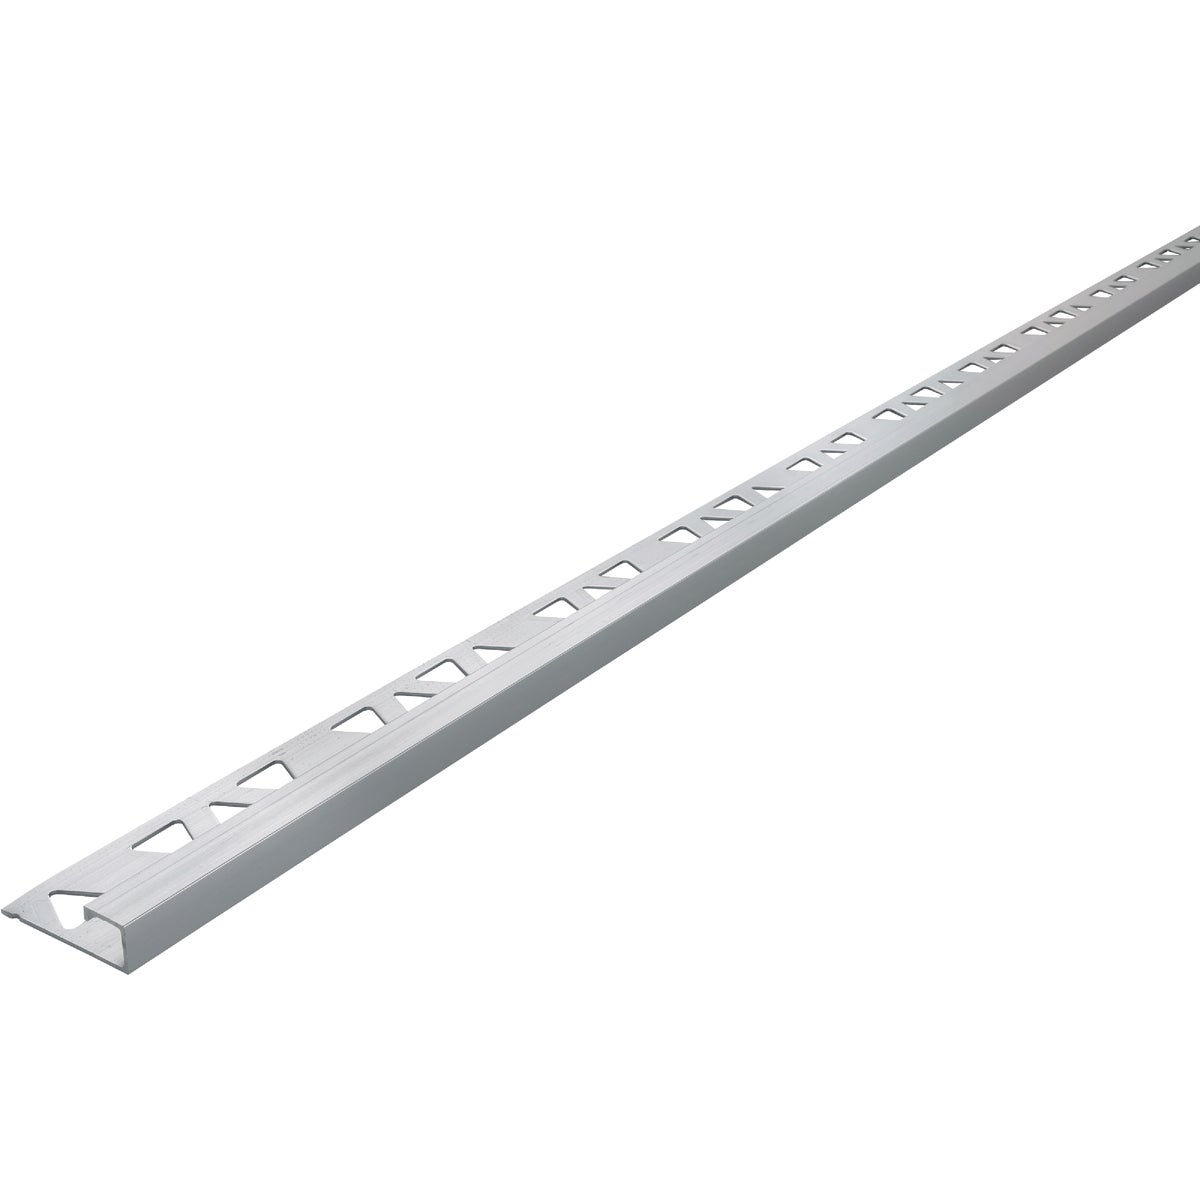 M-D Building Products 3/8 In. x 8 Ft. Bright Clear Bullnose Tile Edging